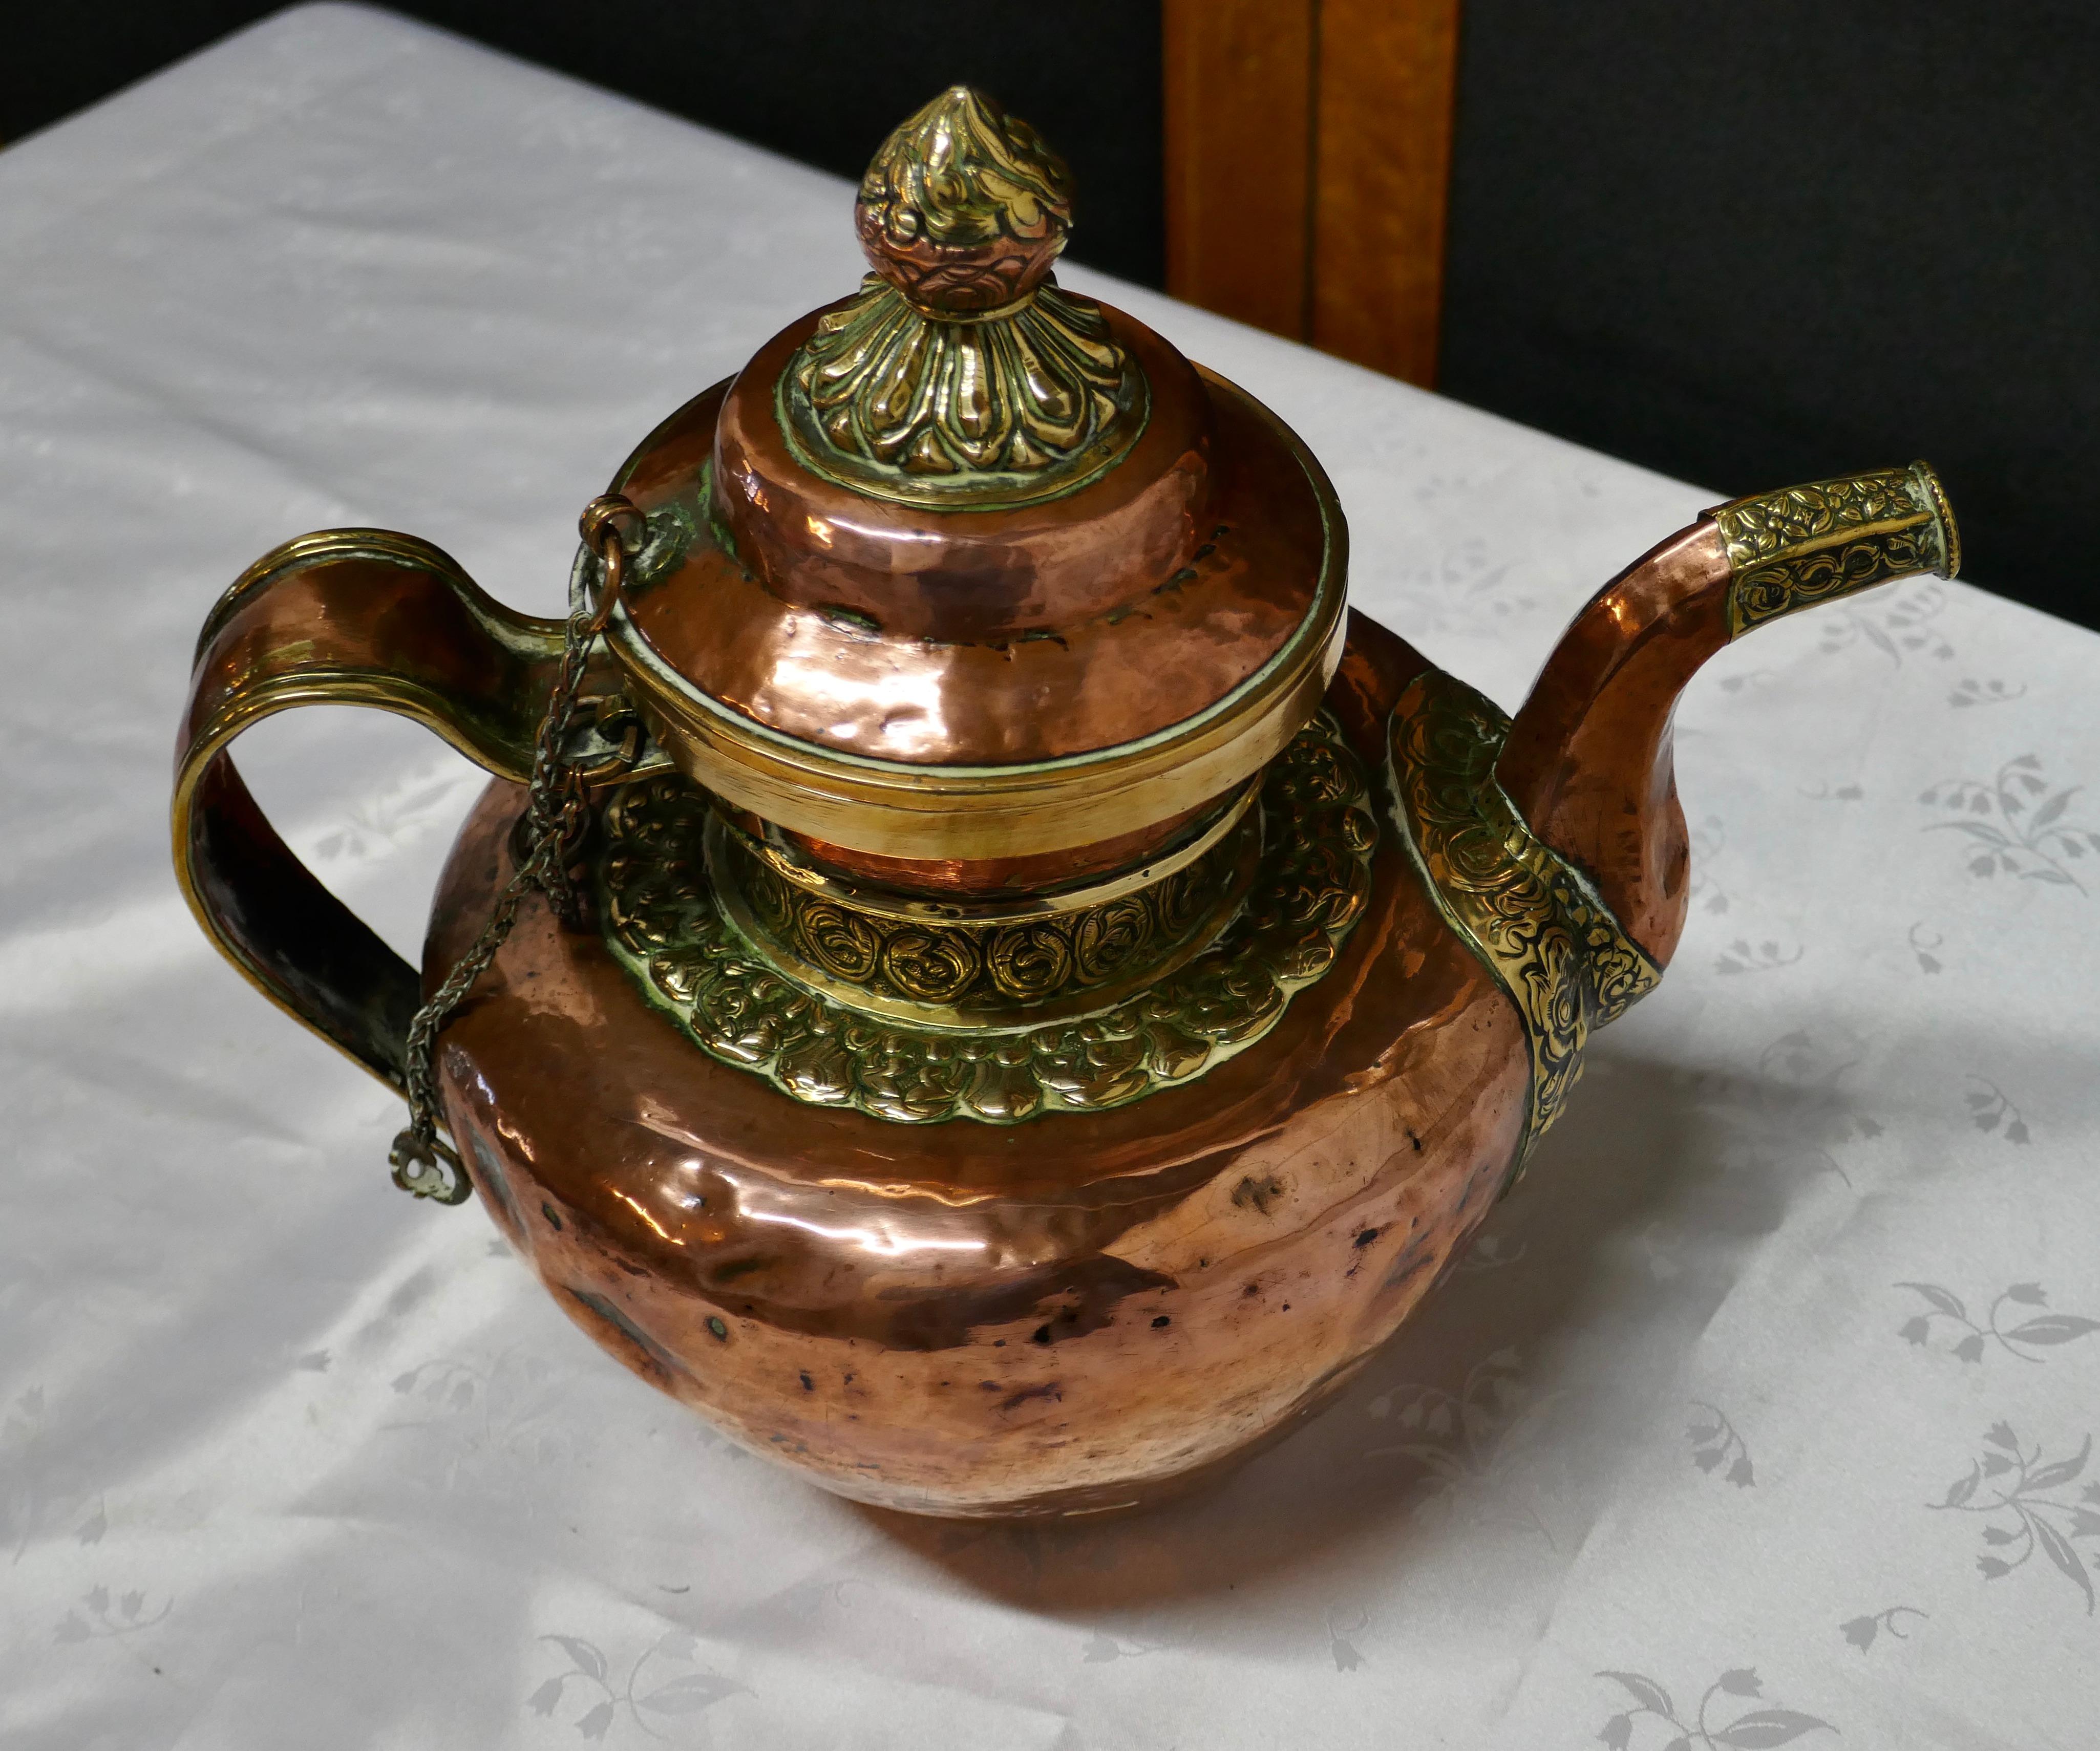 Anglo-Indian Charming 19th Century Indian Beaten Copper and Chased Brass Tea Pot